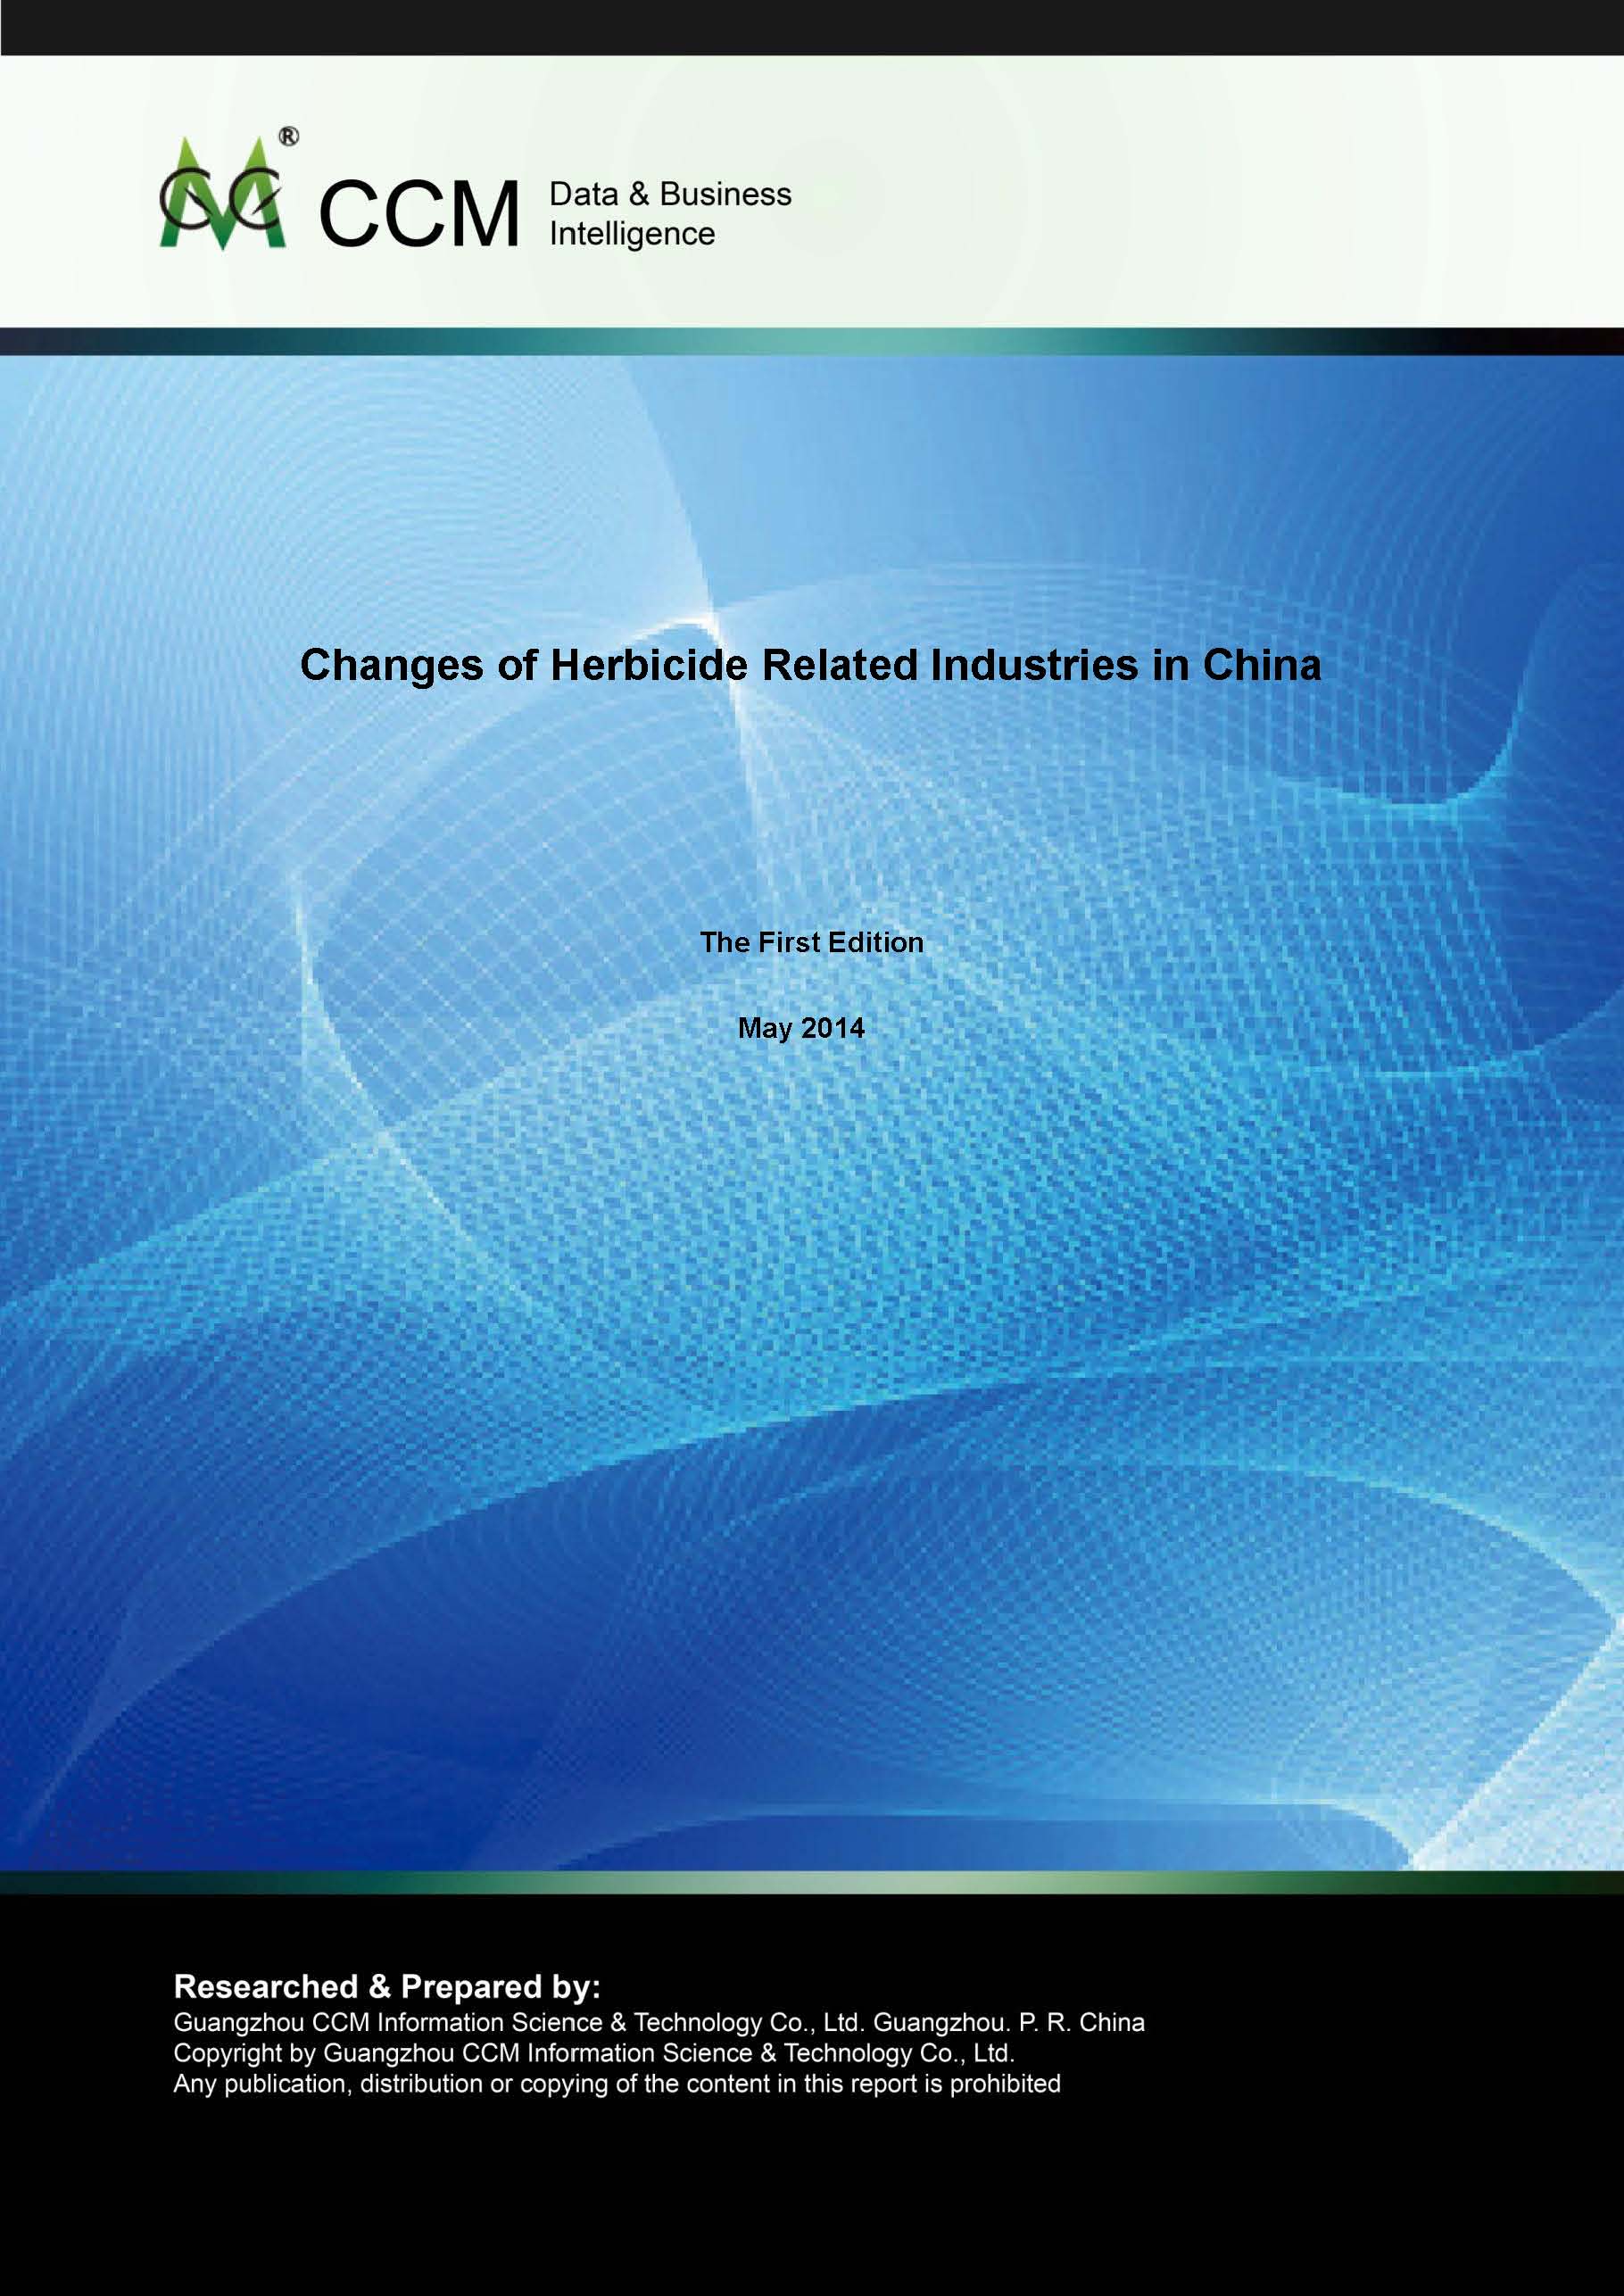 Changes of Herbicide Related Industries in China